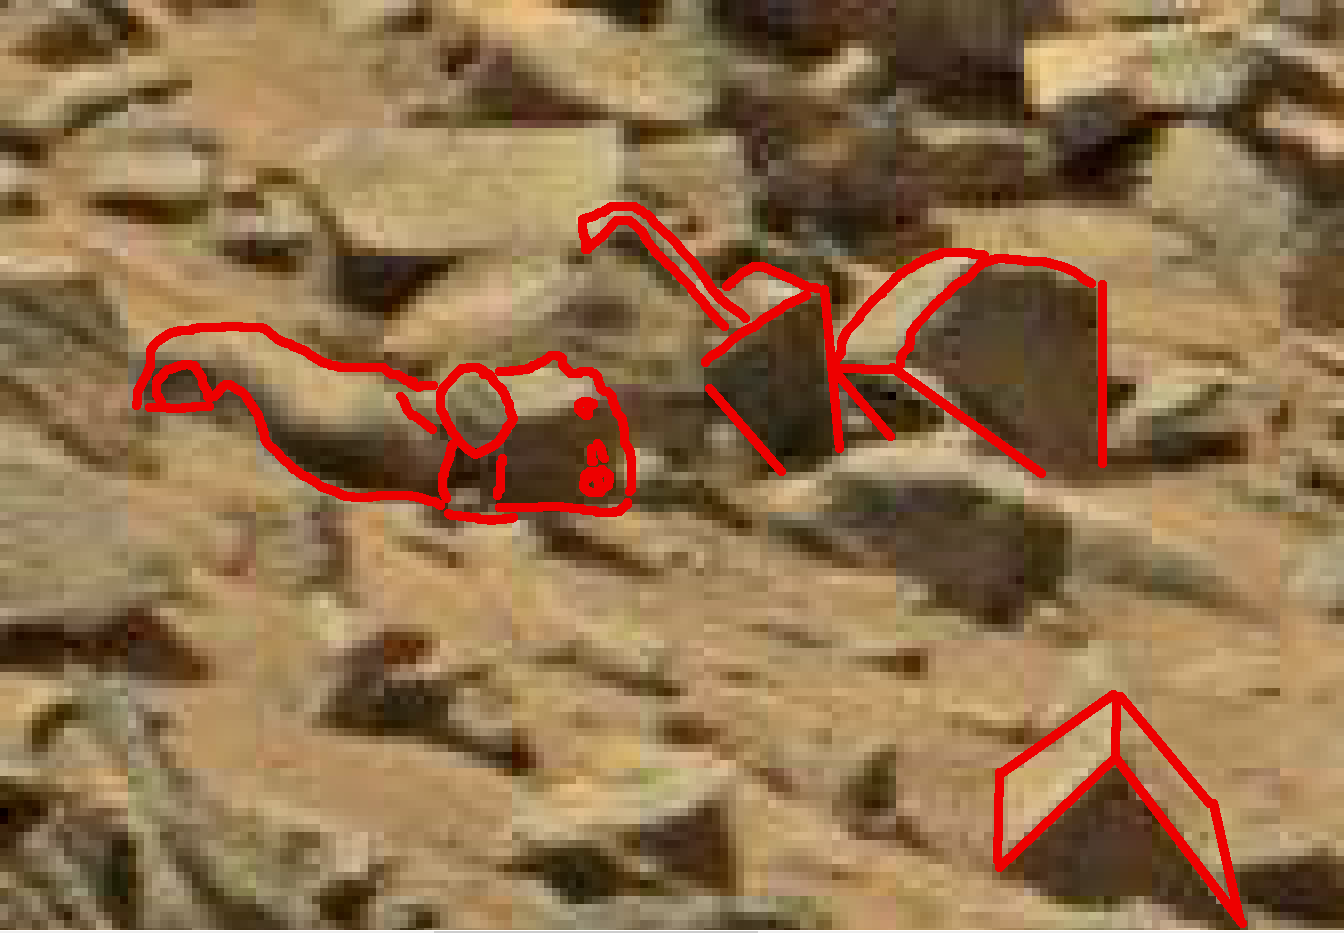 mars anomaly pie shaped stones outlined sol 710 was life on mars